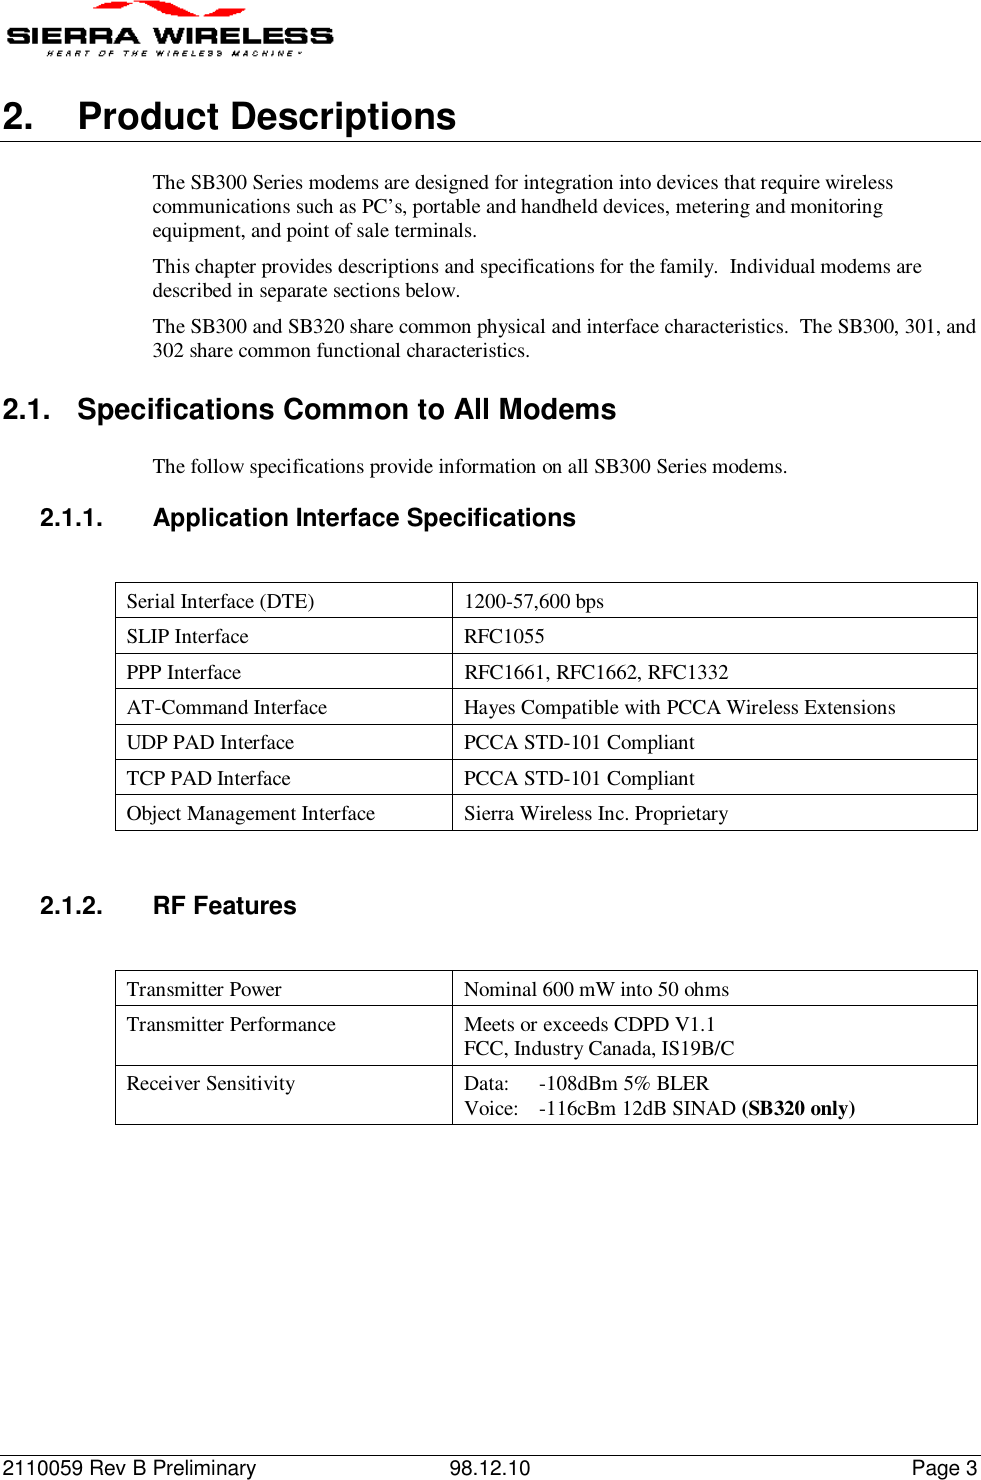 2110059 Rev B Preliminary 98.12.10 Page 32. Product DescriptionsThe SB300 Series modems are designed for integration into devices that require wirelesscommunications such as PC’s, portable and handheld devices, metering and monitoringequipment, and point of sale terminals.This chapter provides descriptions and specifications for the family.  Individual modems aredescribed in separate sections below.The SB300 and SB320 share common physical and interface characteristics.  The SB300, 301, and302 share common functional characteristics.2.1.  Specifications Common to All ModemsThe follow specifications provide information on all SB300 Series modems.2.1.1.  Application Interface SpecificationsSerial Interface (DTE) 1200-57,600 bpsSLIP Interface RFC1055PPP Interface RFC1661, RFC1662, RFC1332AT-Command Interface Hayes Compatible with PCCA Wireless ExtensionsUDP PAD Interface PCCA STD-101 CompliantTCP PAD Interface PCCA STD-101 CompliantObject Management Interface Sierra Wireless Inc. Proprietary2.1.2. RF FeaturesTransmitter Power Nominal 600 mW into 50 ohmsTransmitter Performance Meets or exceeds CDPD V1.1FCC, Industry Canada, IS19B/CReceiver Sensitivity Data: -108dBm 5% BLERVoice: -116cBm 12dB SINAD (SB320 only)